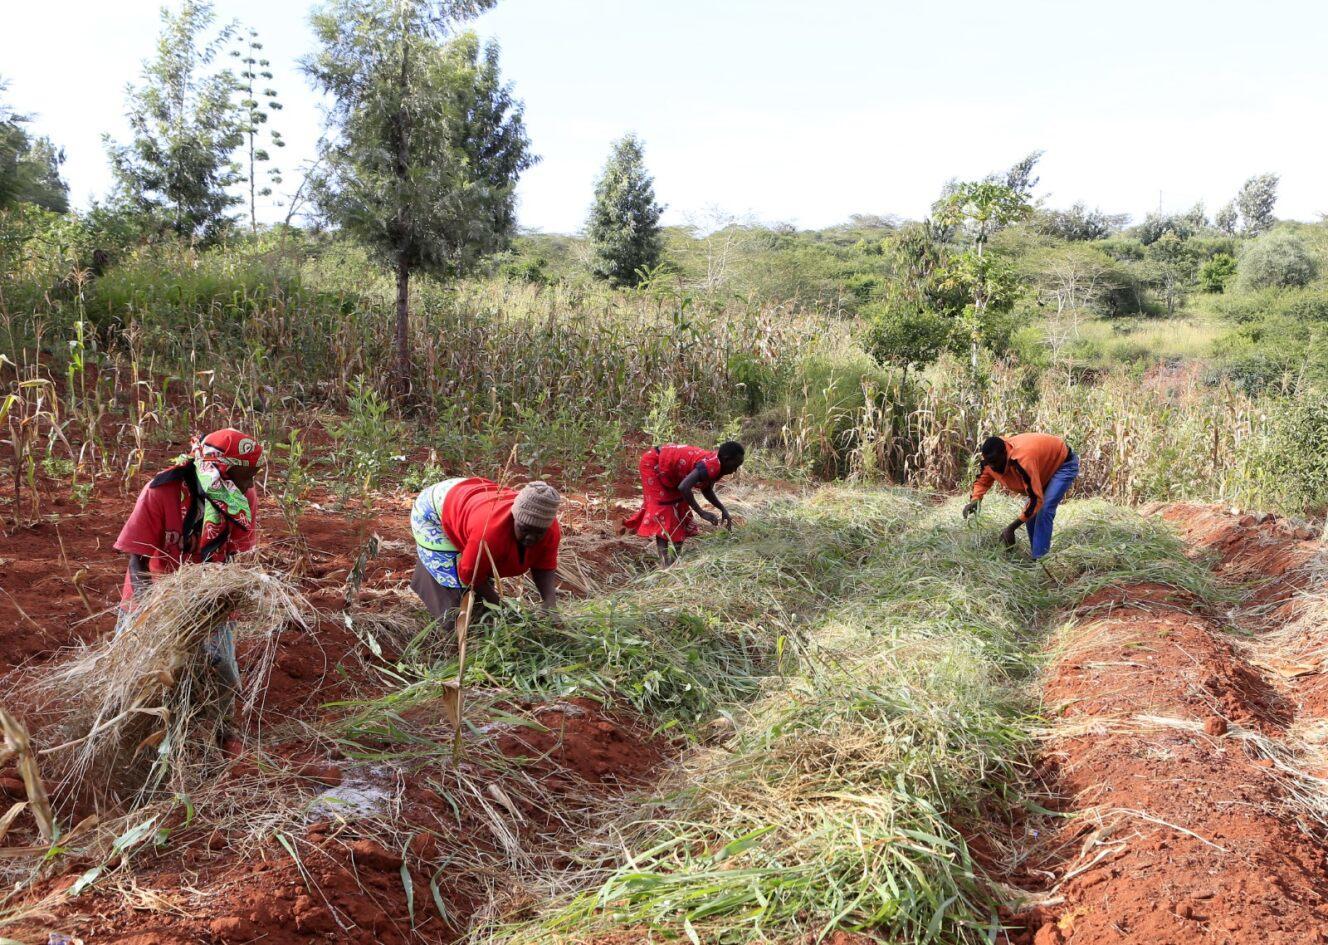 Food forests are connecting vulnerable consumers and organic farmers in Kenya - Alliance Bioversity International - CIAT